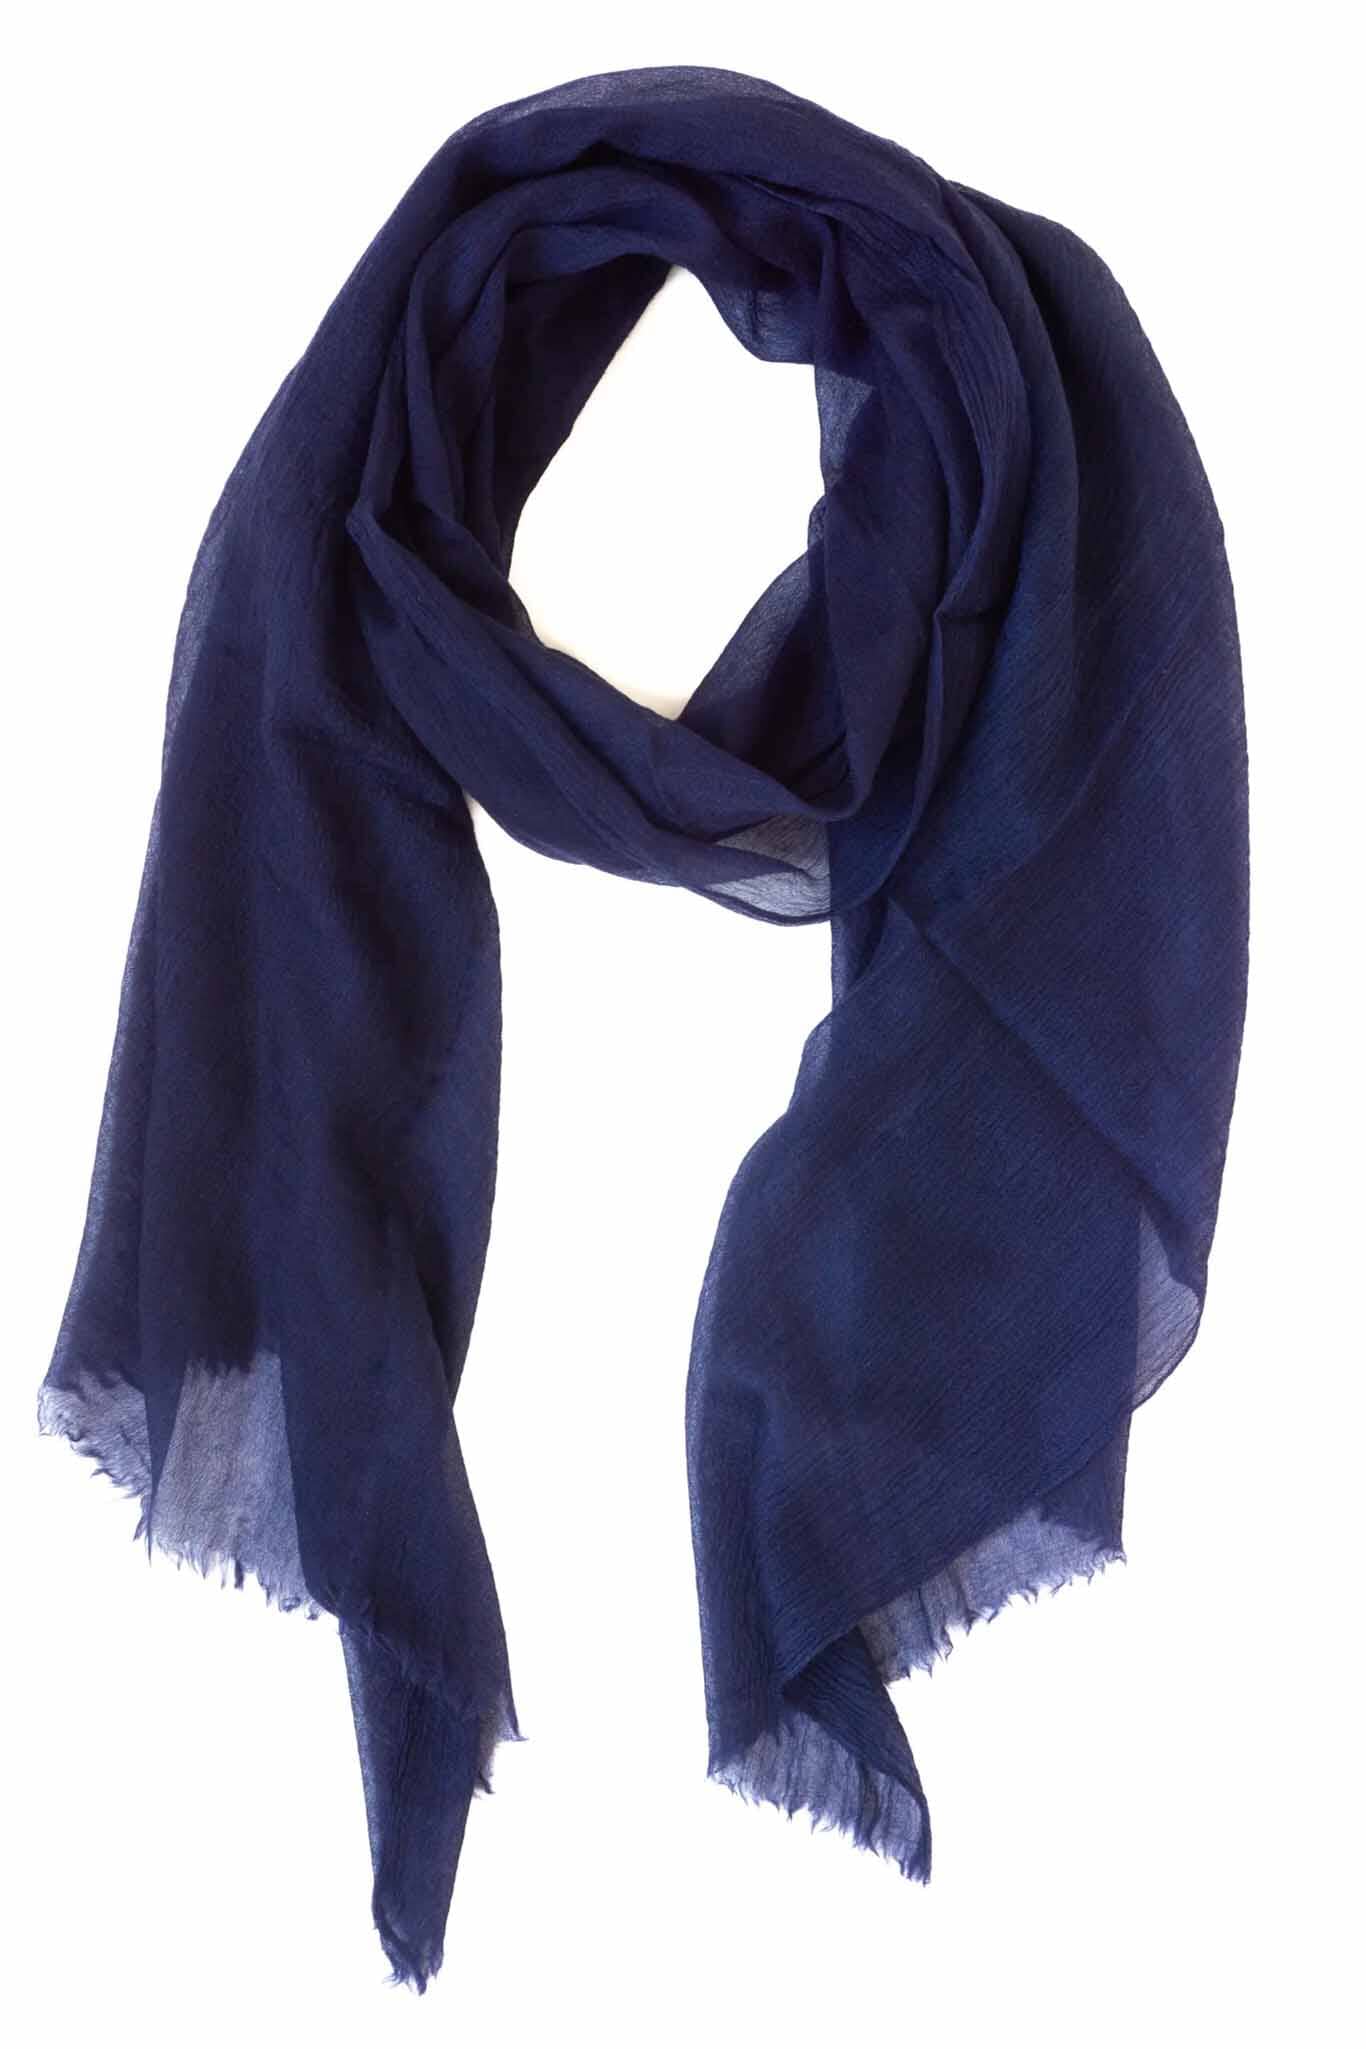 From the Road Vayu Scarf - Royal